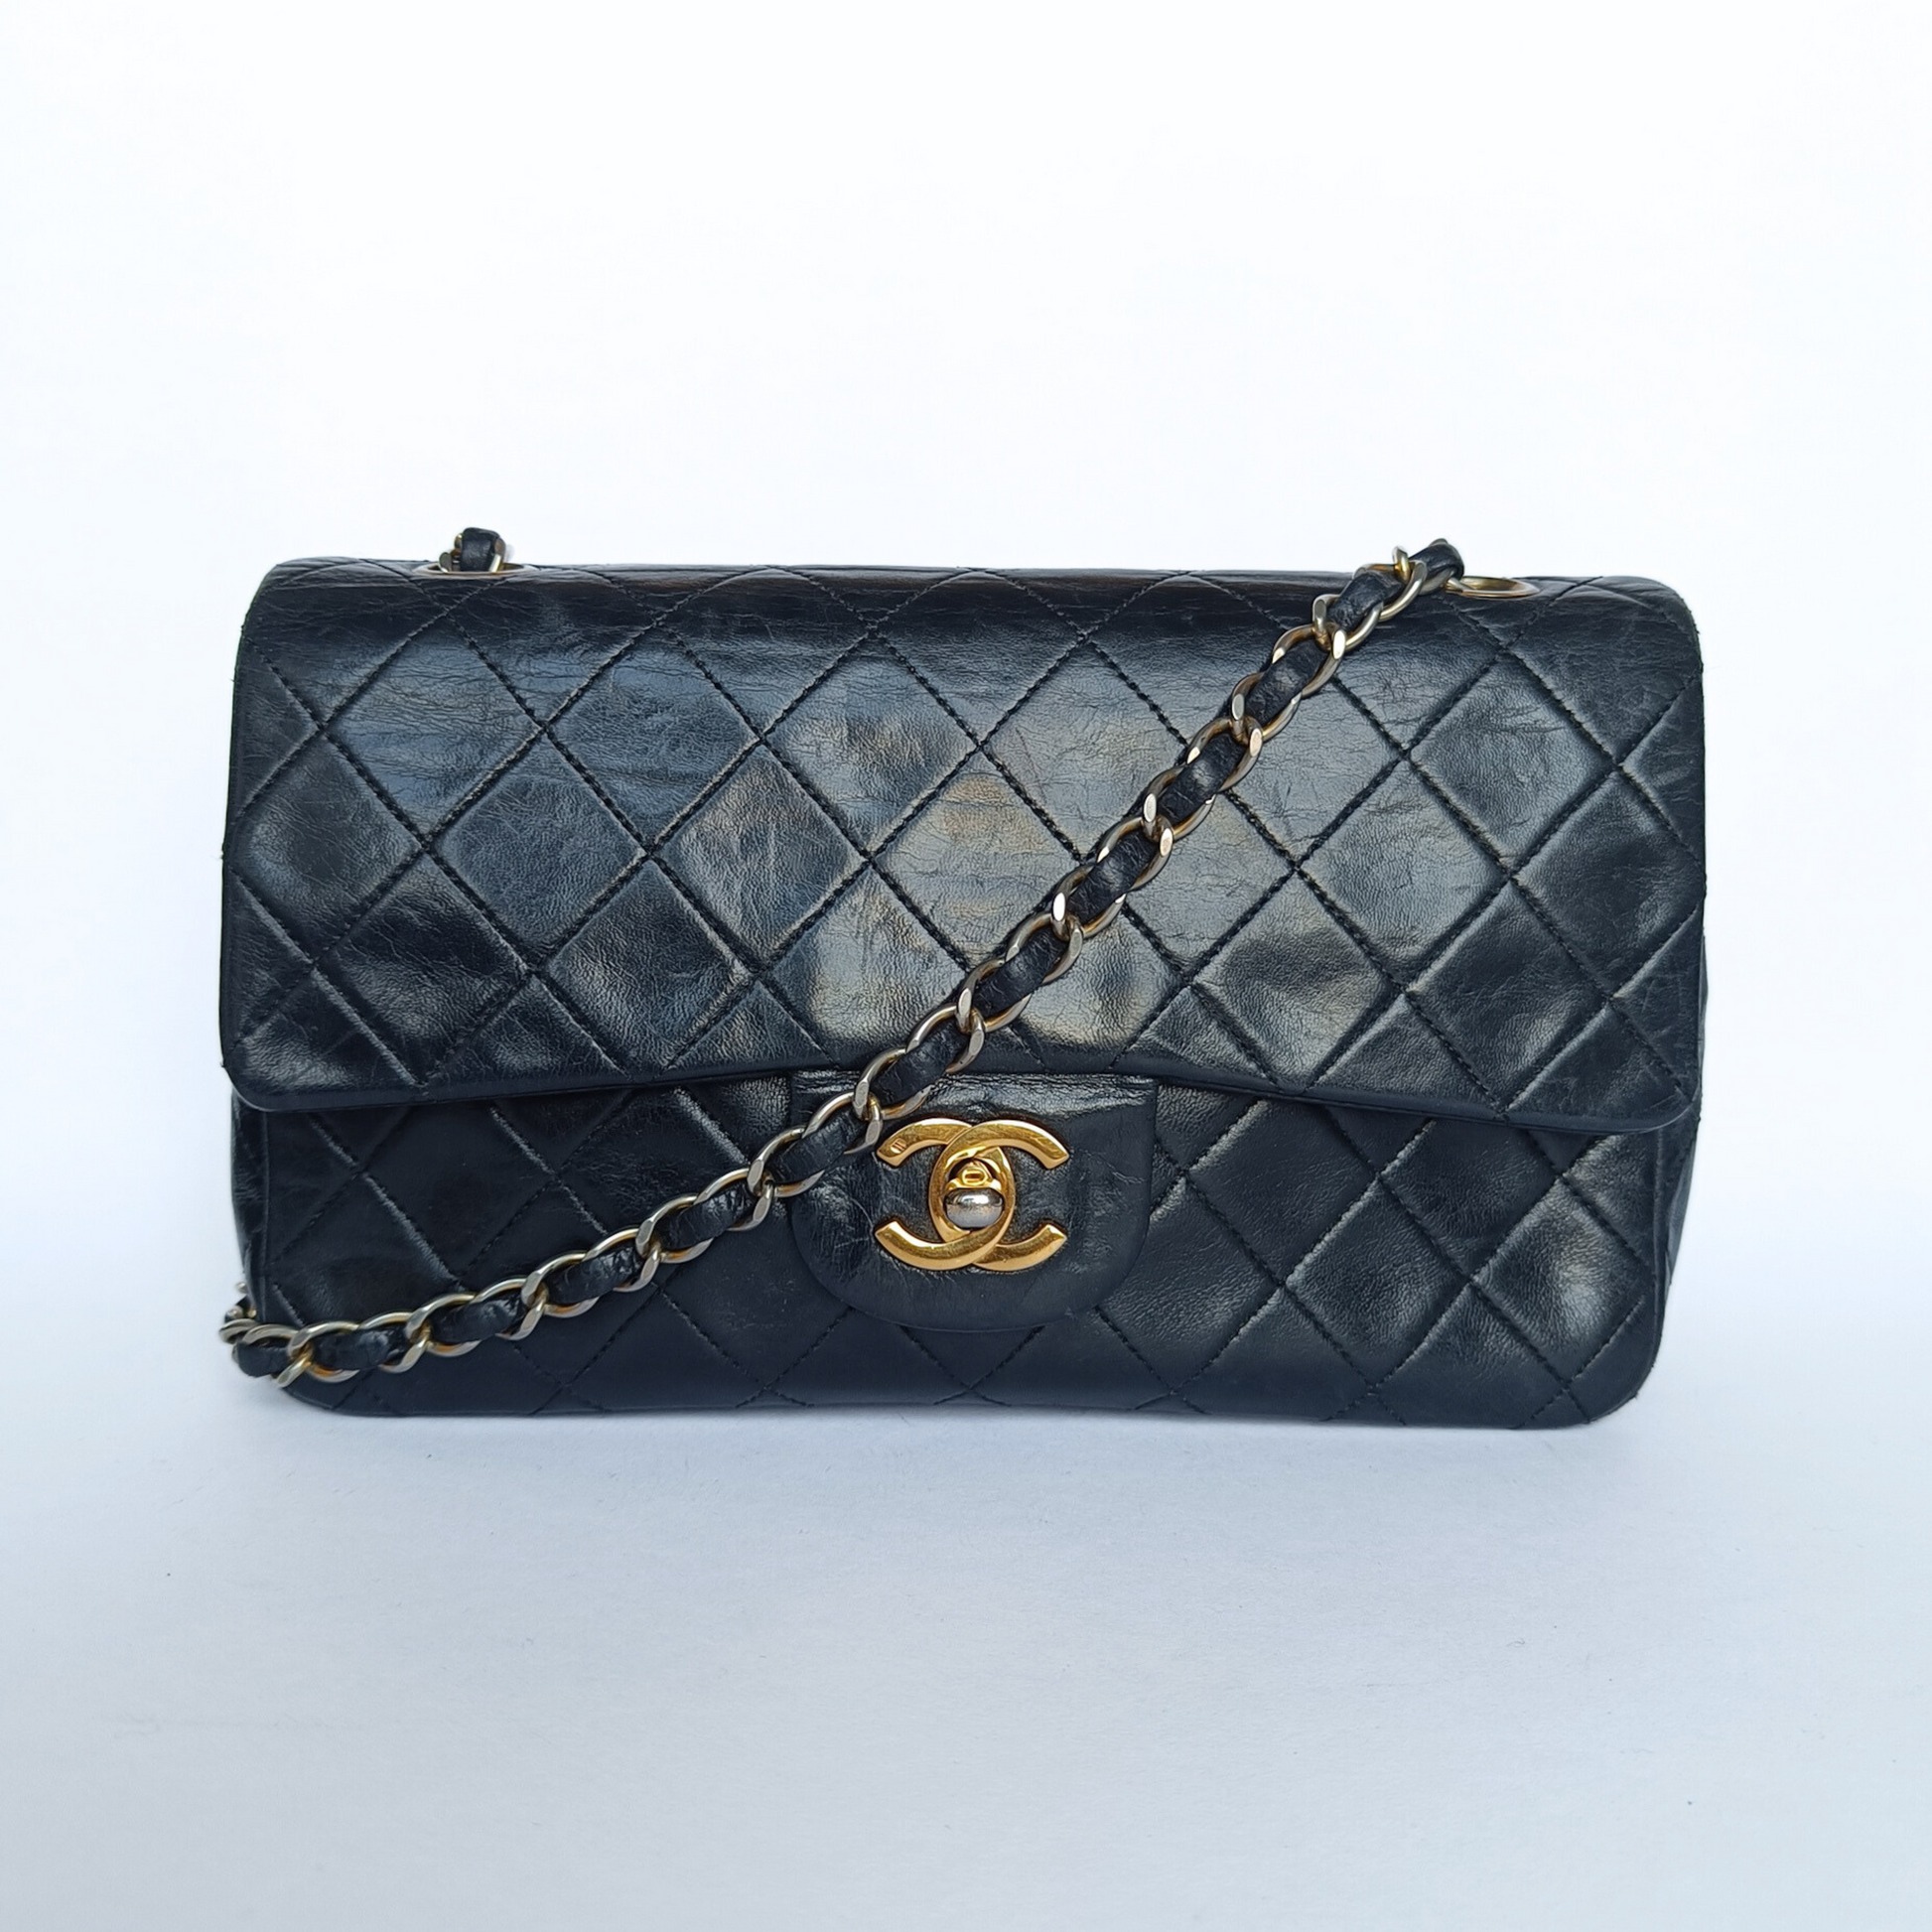 Chanel Chanel Classic Double Flap Bag Small Lambskin Leather - Shoulder bag - Etoile Luxury Vintage